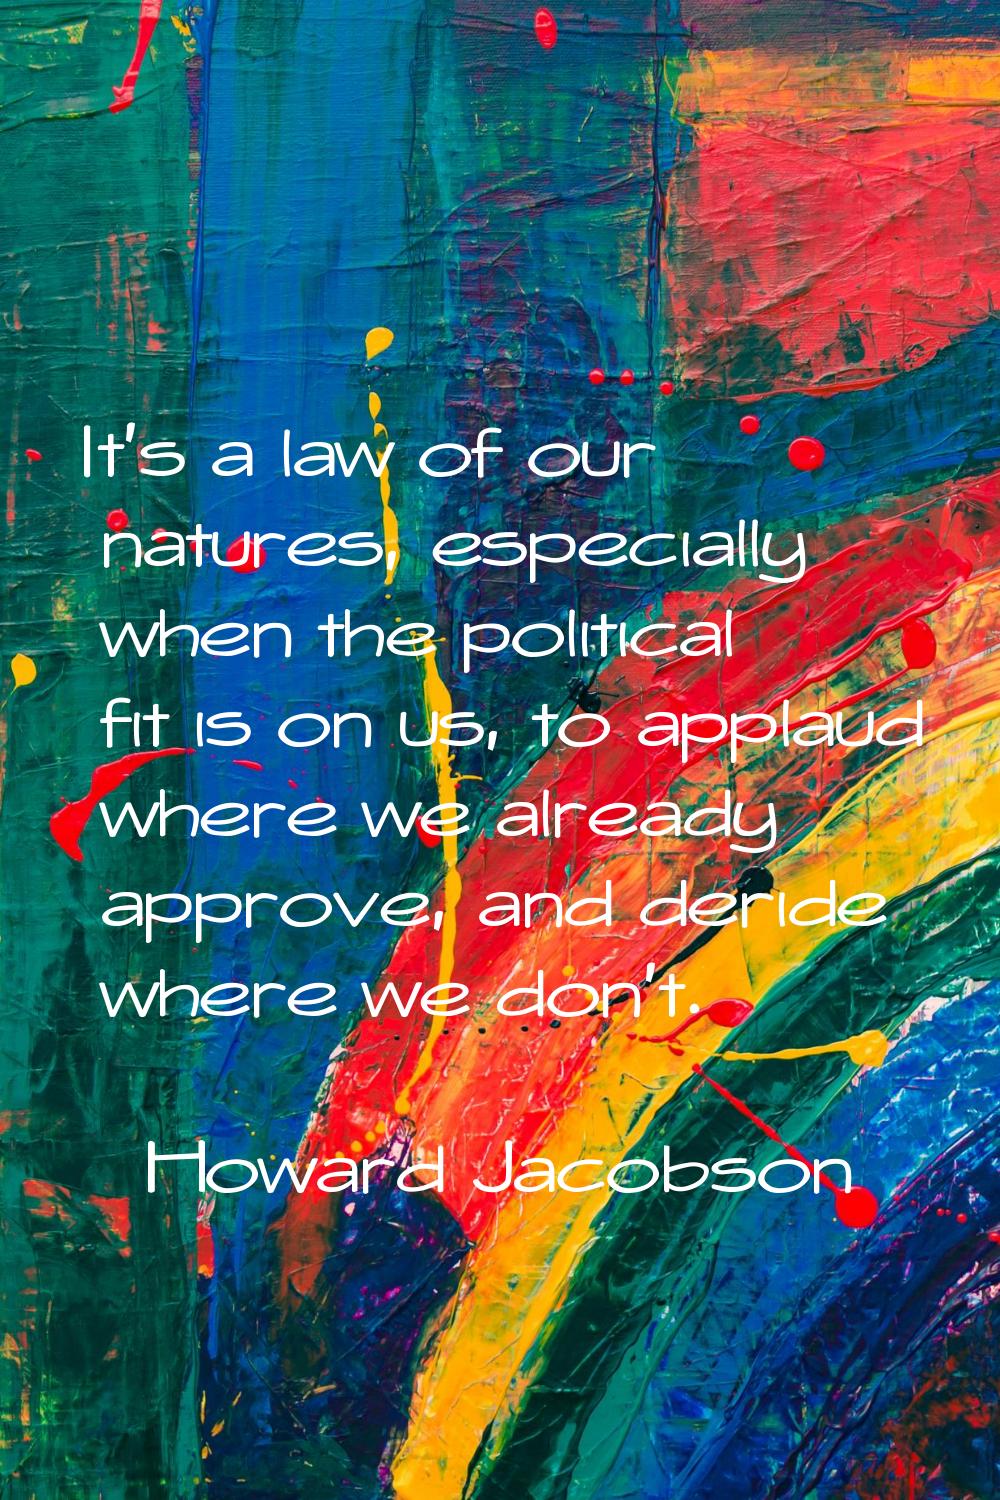 It's a law of our natures, especially when the political fit is on us, to applaud where we already 